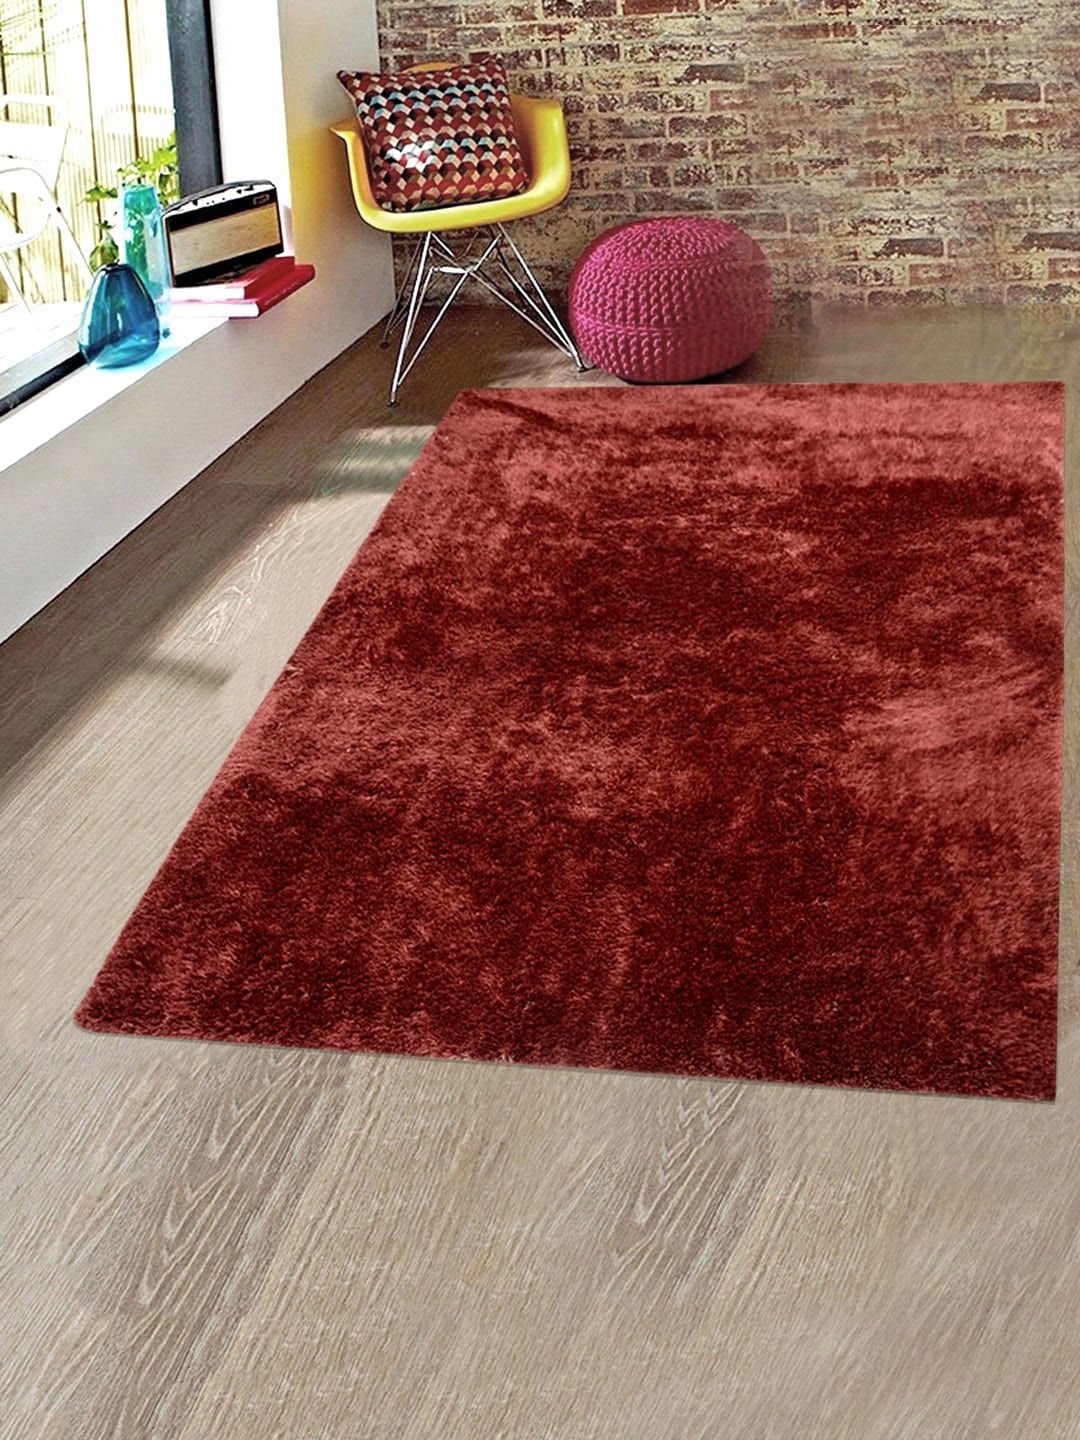 Saral Home Maroon Solid Cotton Classic Double Shaded Shaggy Carpet Price in India